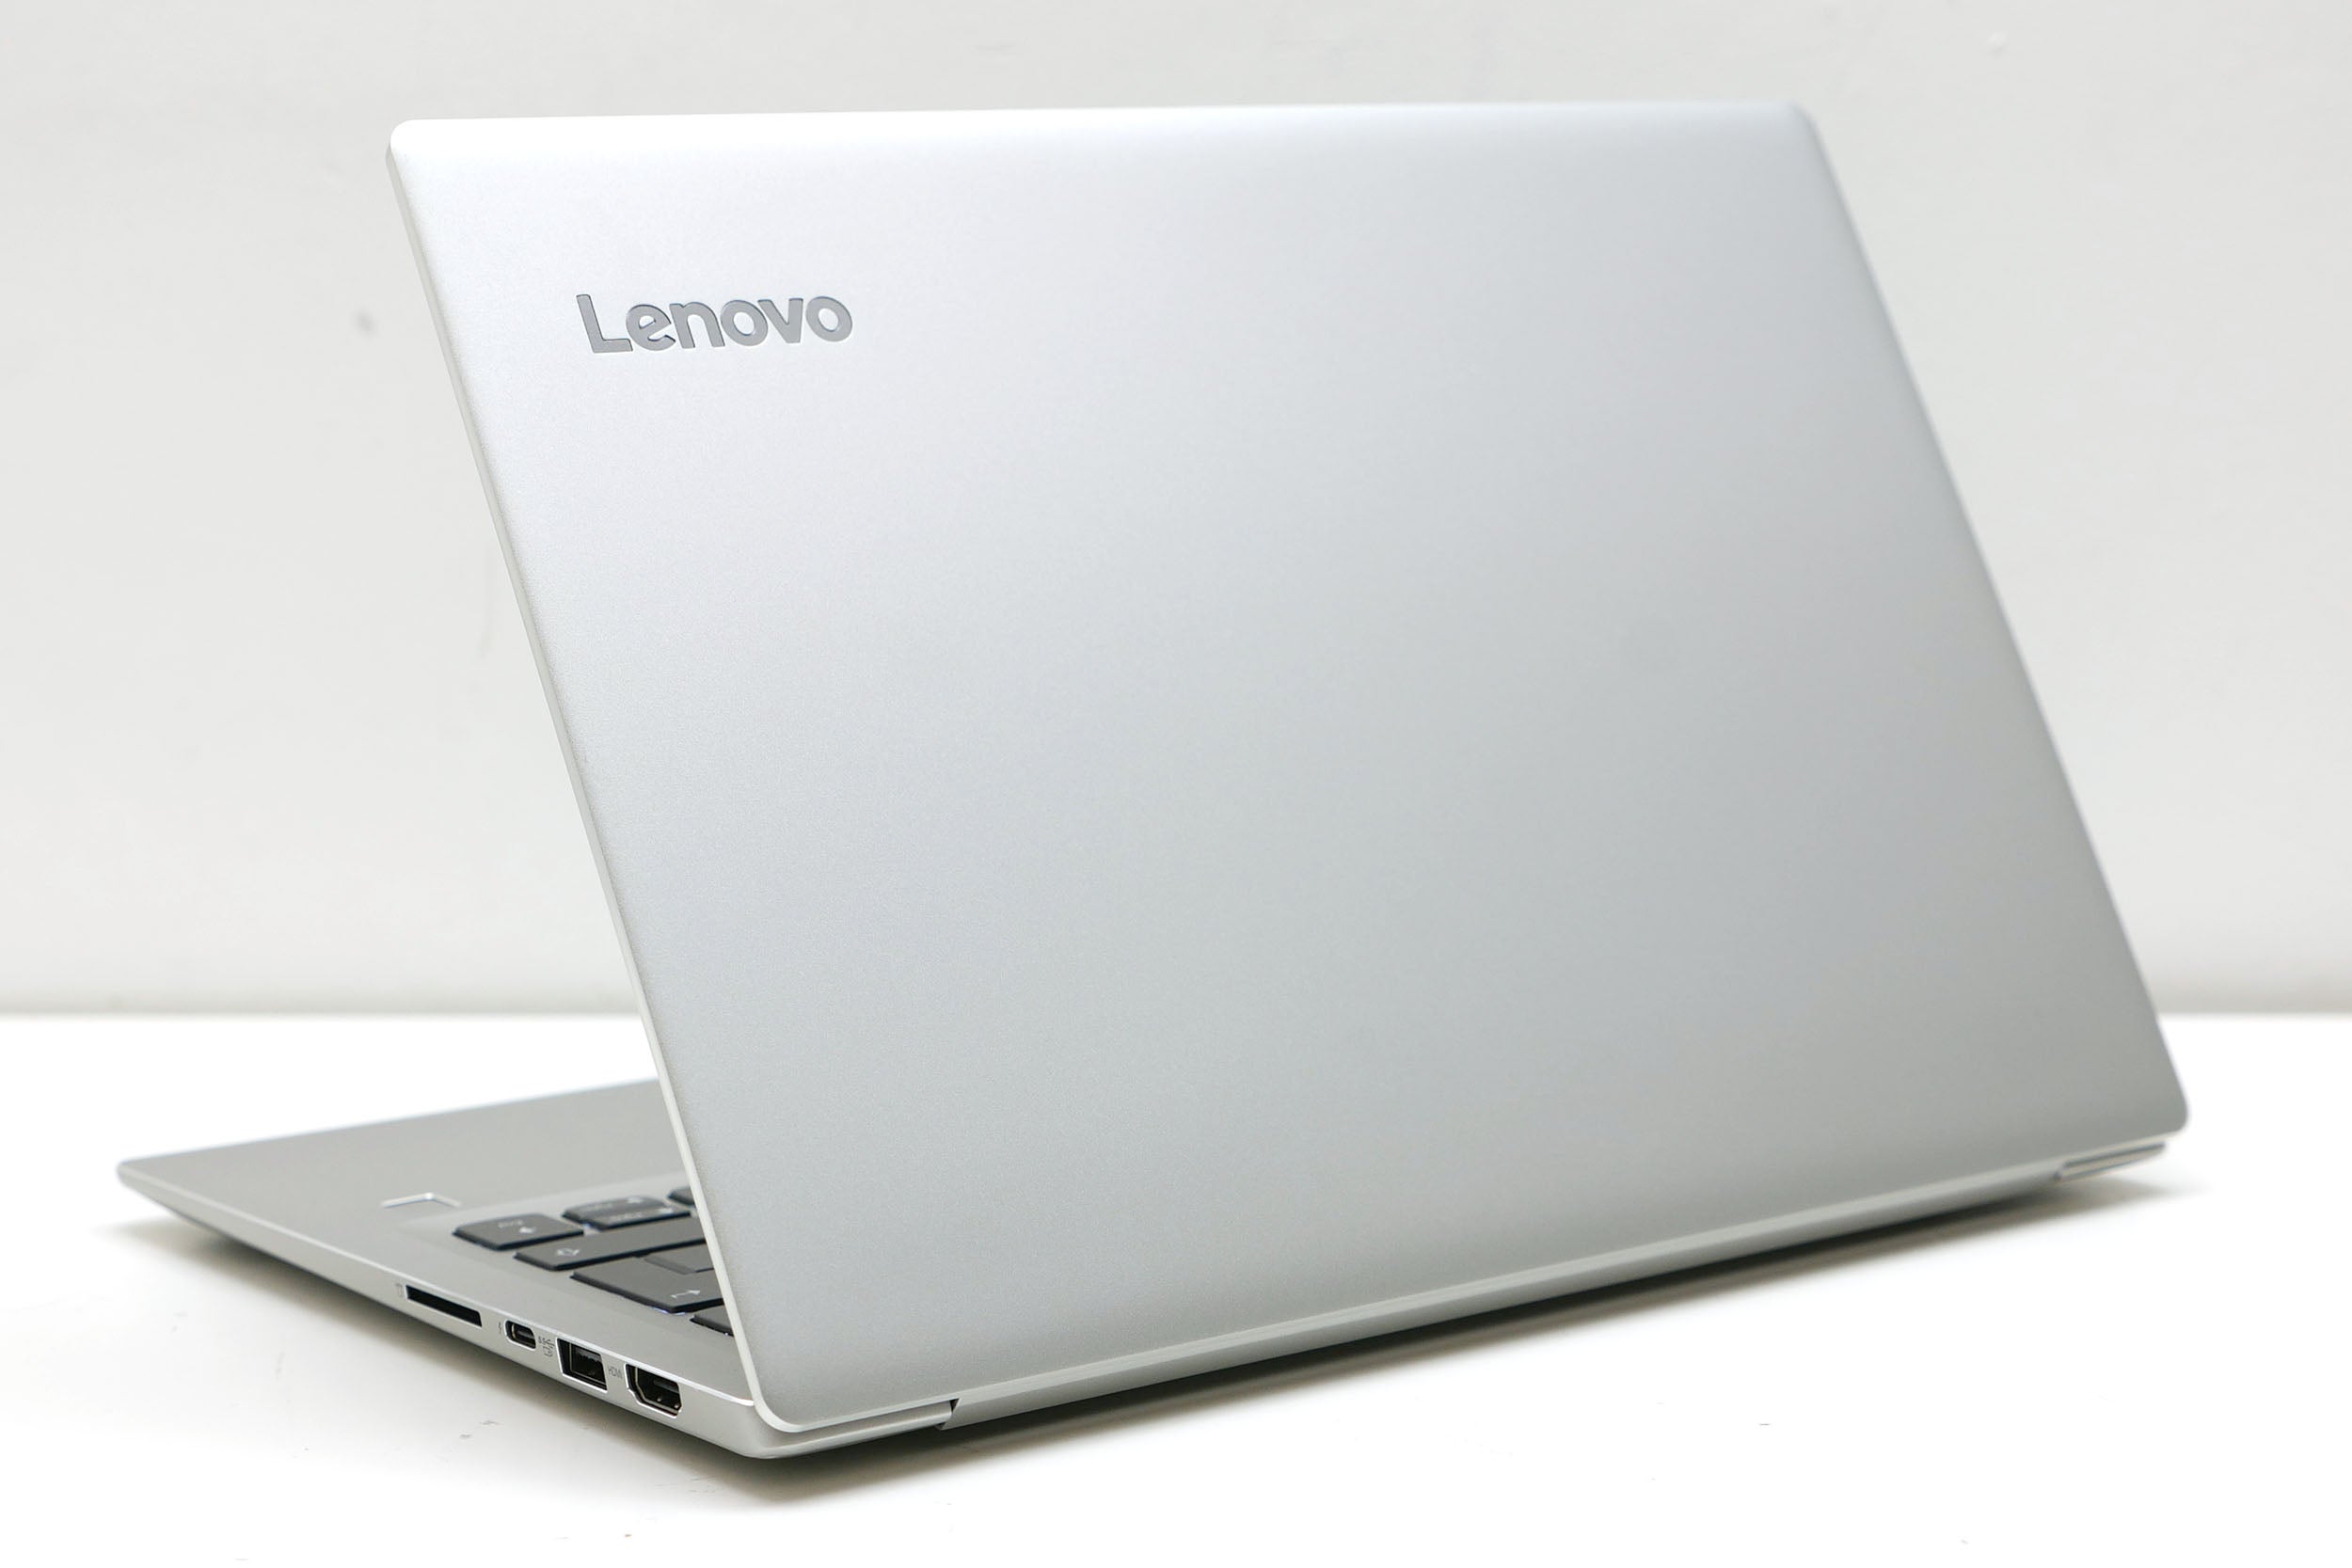 Lenovo IdeaPad 720S laptop with visible ports and logo